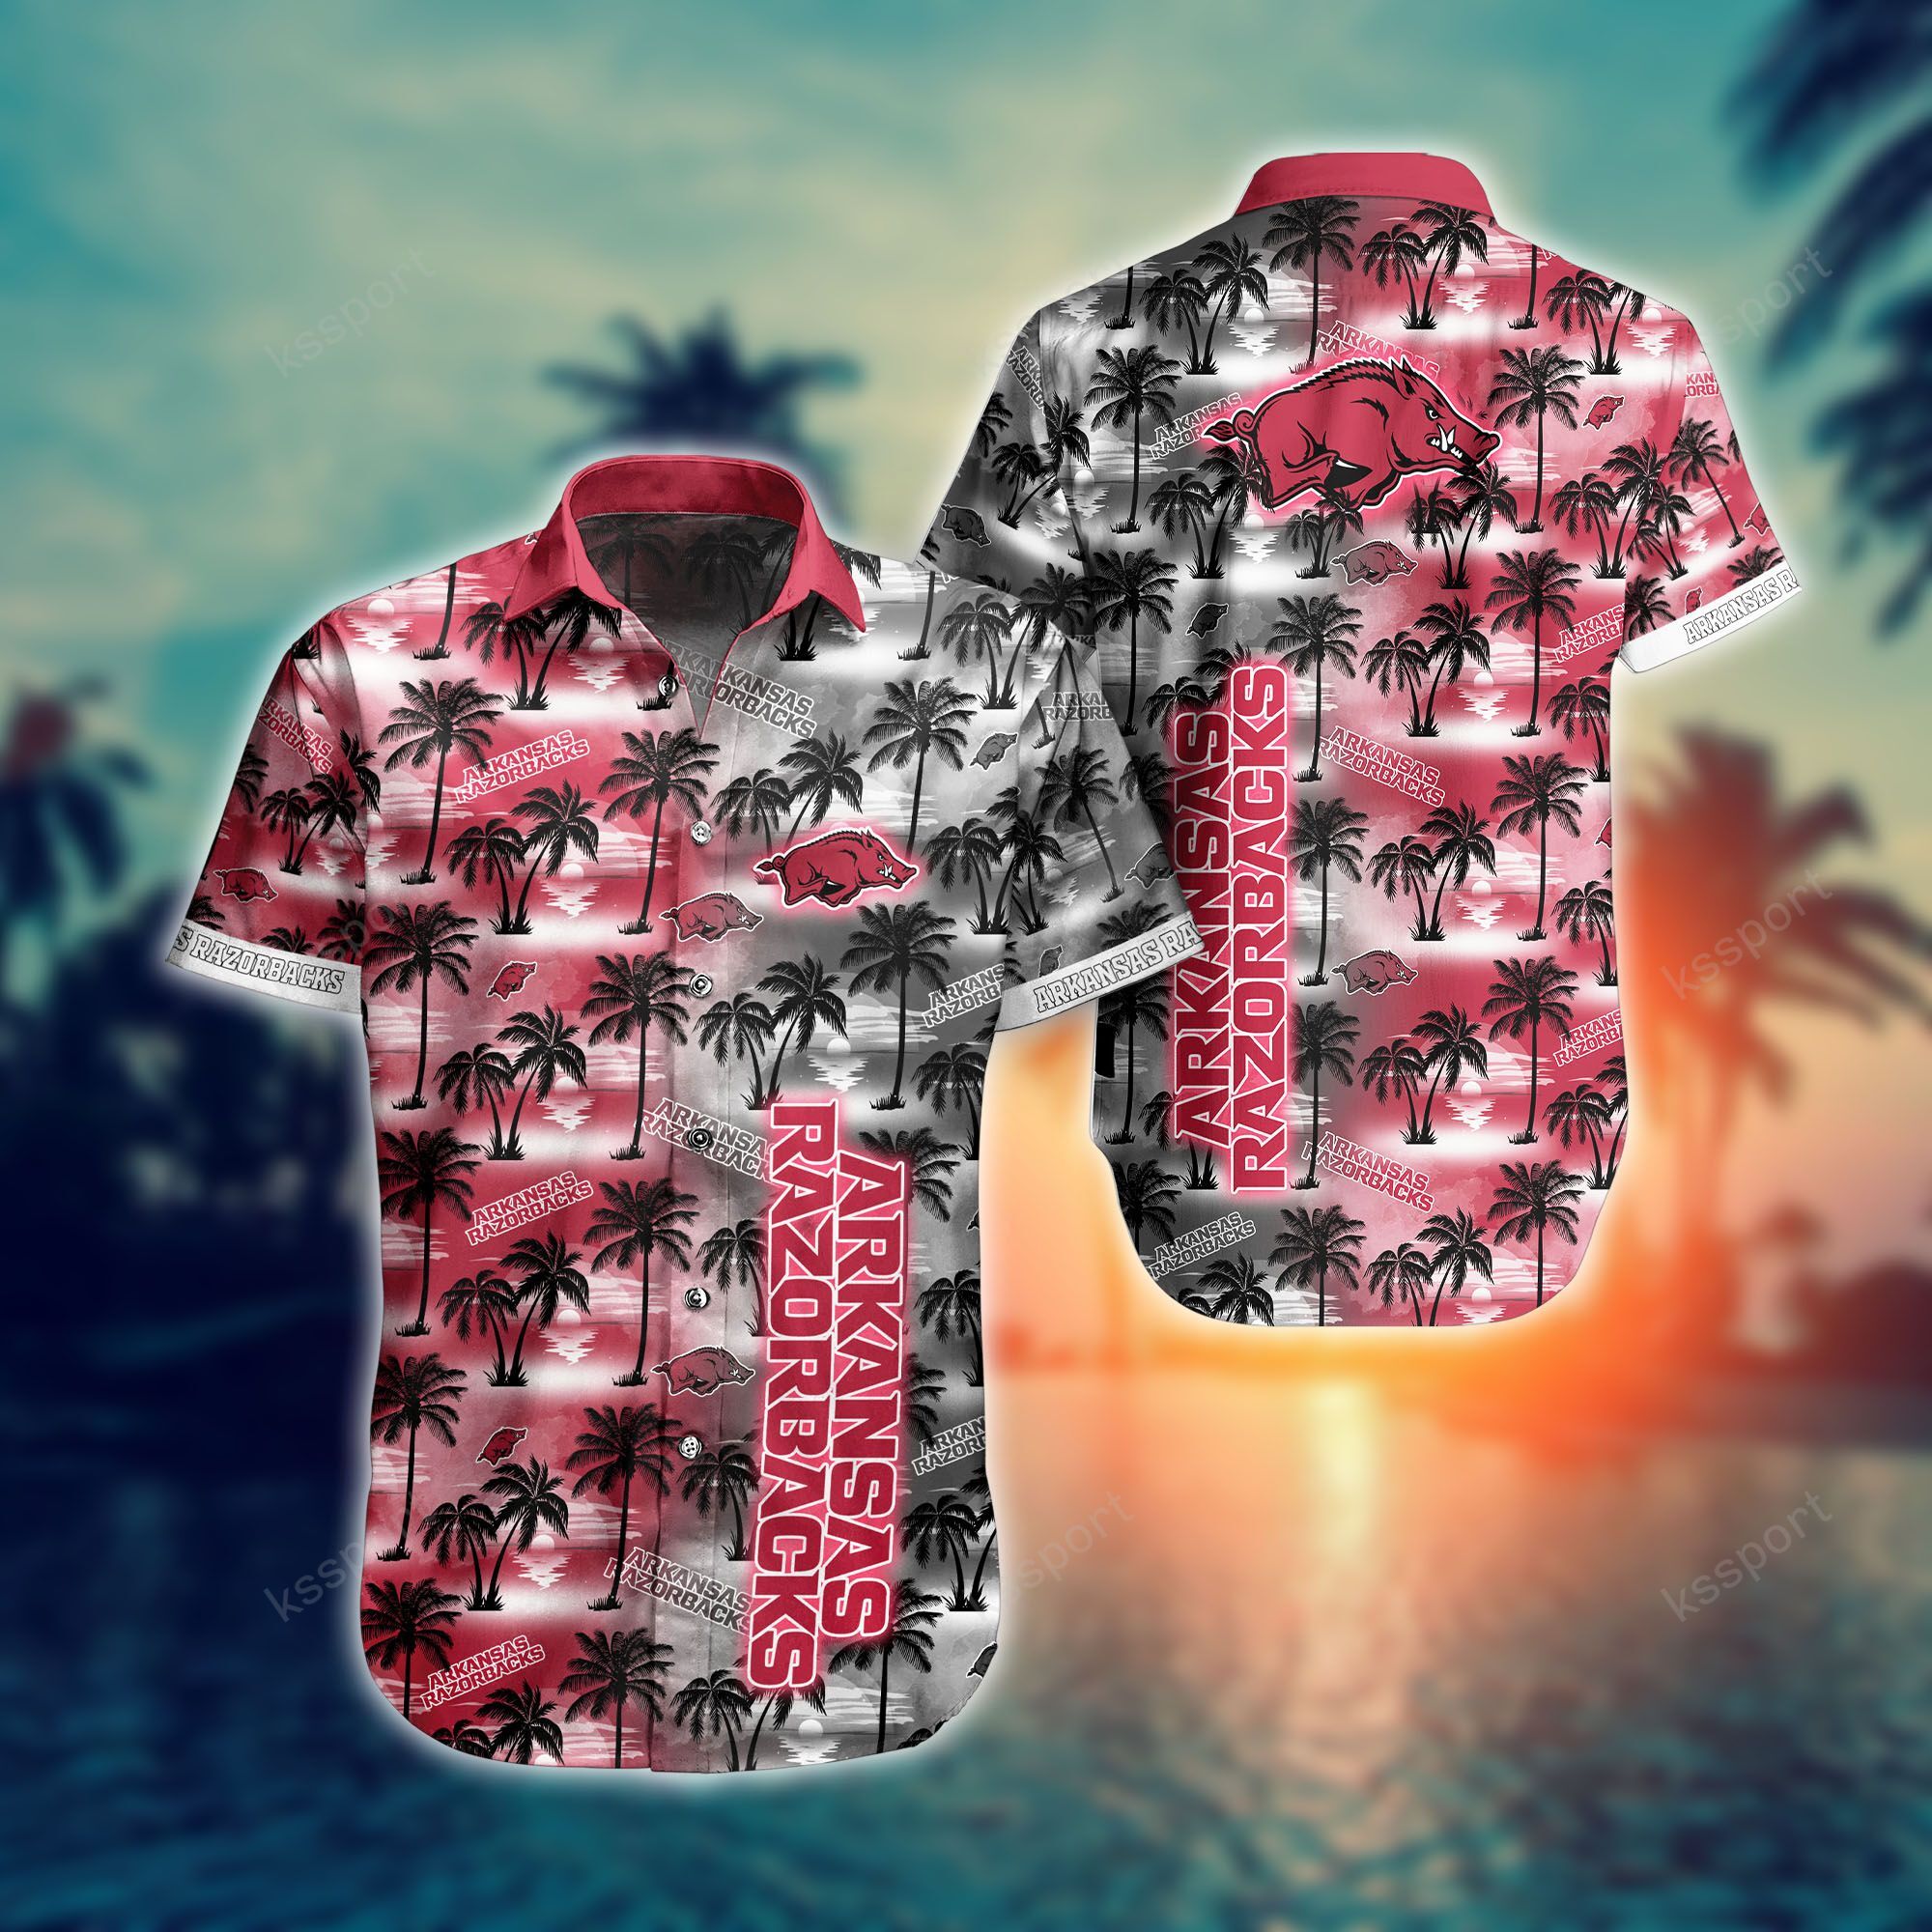 Treat yourself to a cool Hawaiian set today! 7